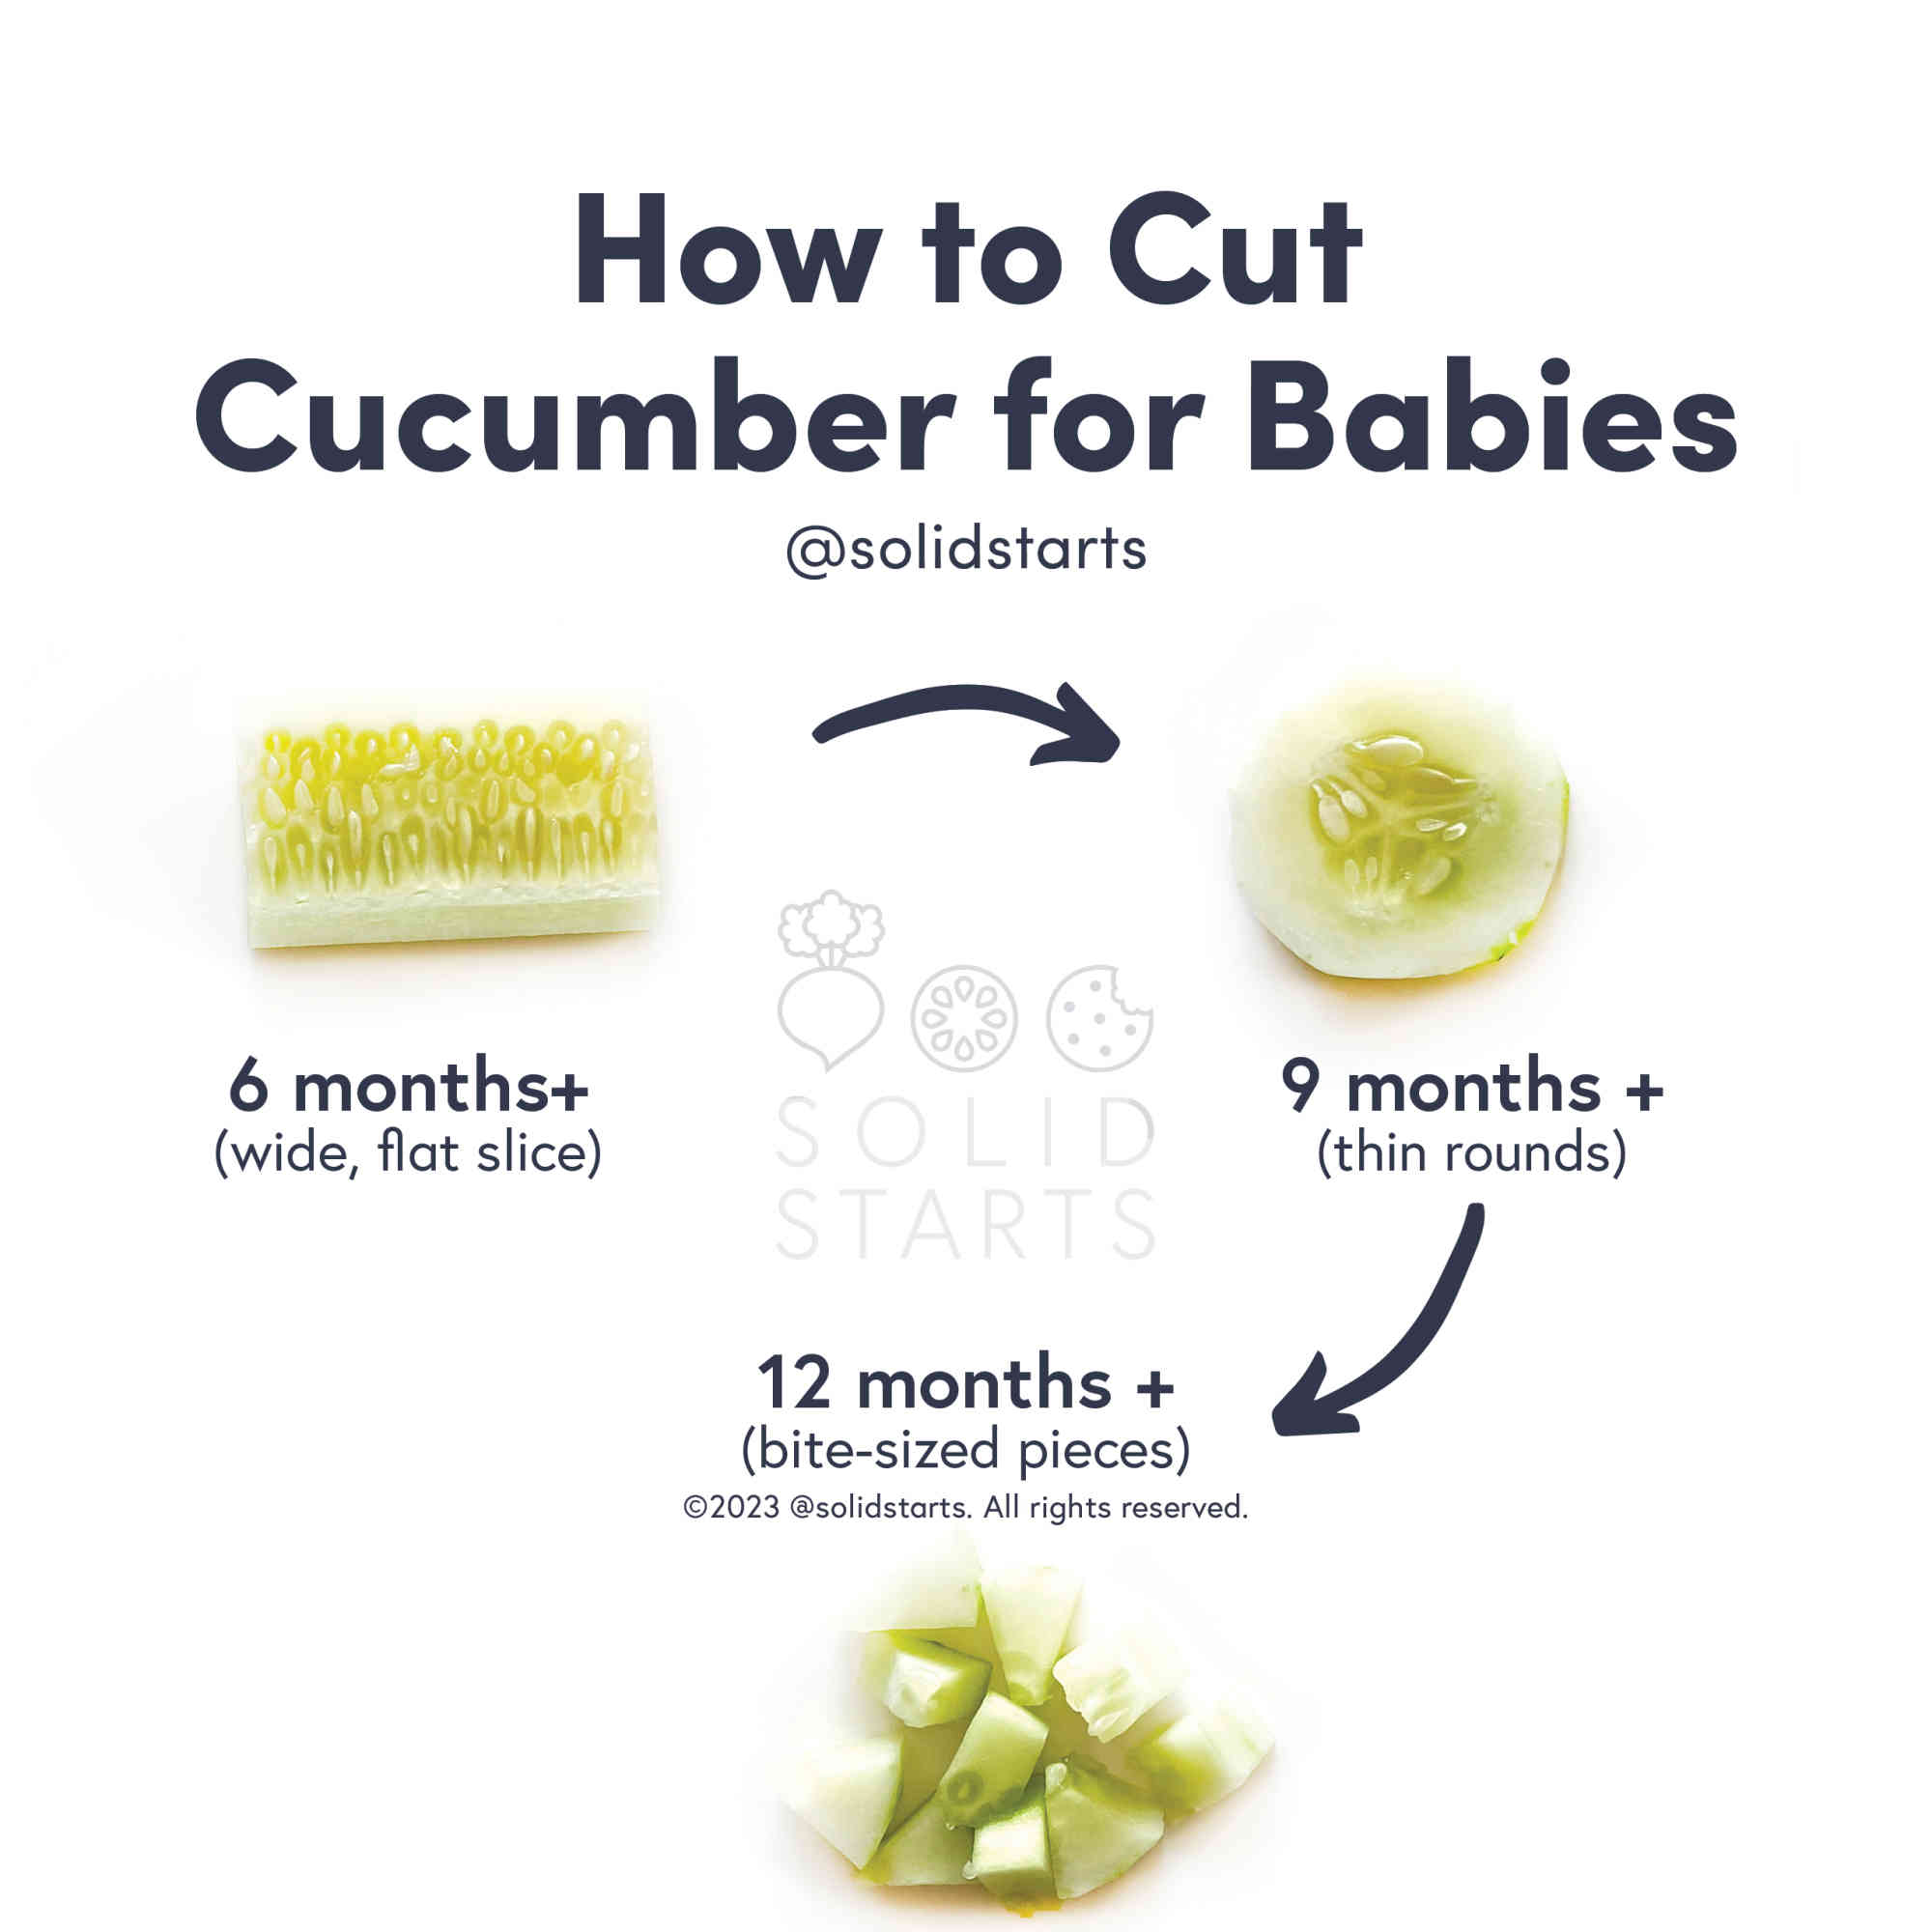 How to Cut Cucumber for Babies